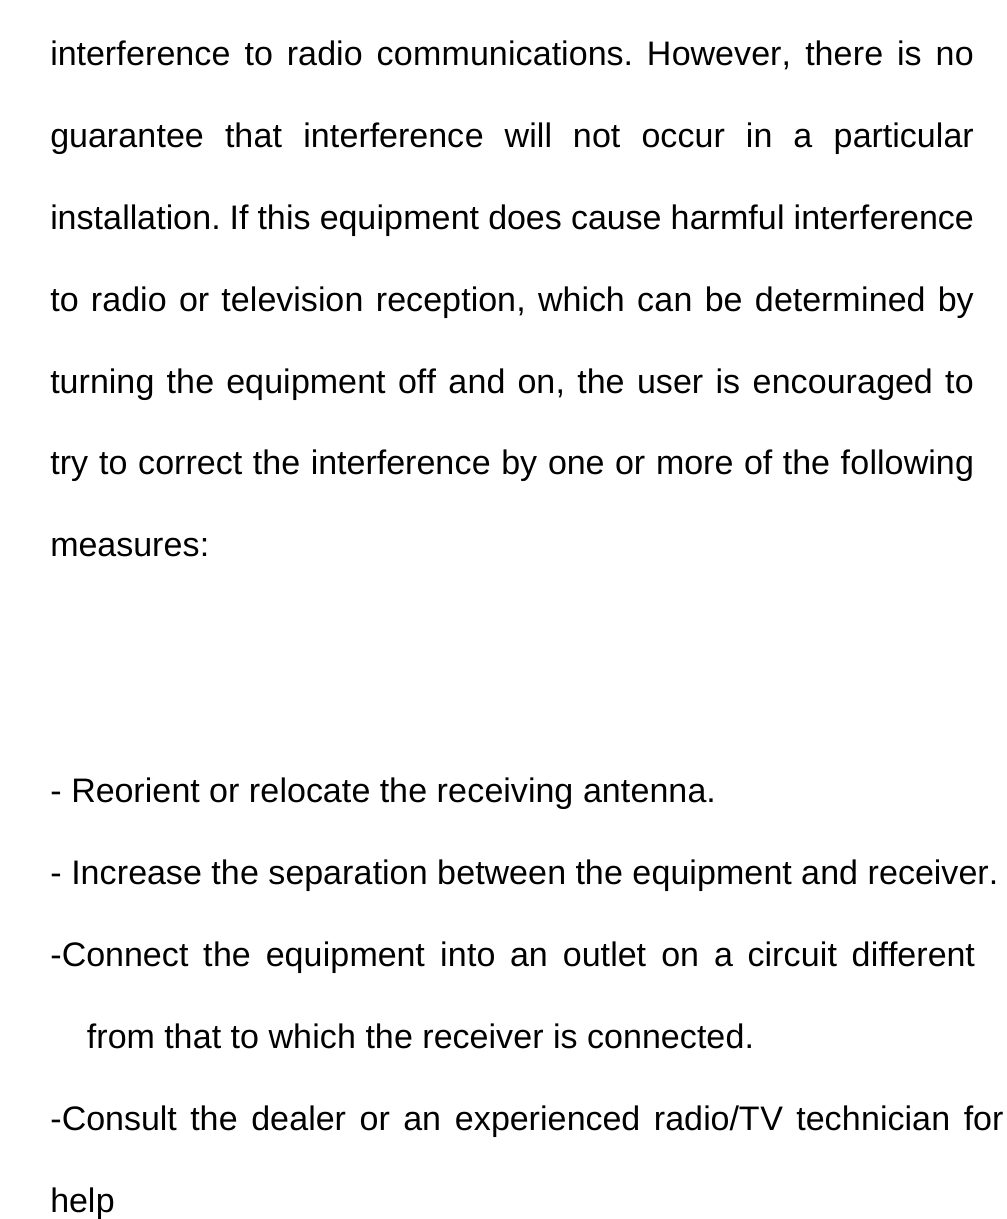  interference to radio communications. However, there is no guarantee that interference will not occur in a particular installation. If this equipment does cause harmful interference to radio or television reception, which can be determined by turning the equipment off and on, the user is encouraged to try to correct the interference by one or more of the following measures:   - Reorient or relocate the receiving antenna. - Increase the separation between the equipment and receiver. -Connect the equipment into an outlet on a circuit different from that to which the receiver is connected. -Consult the dealer or an experienced radio/TV technician for help  